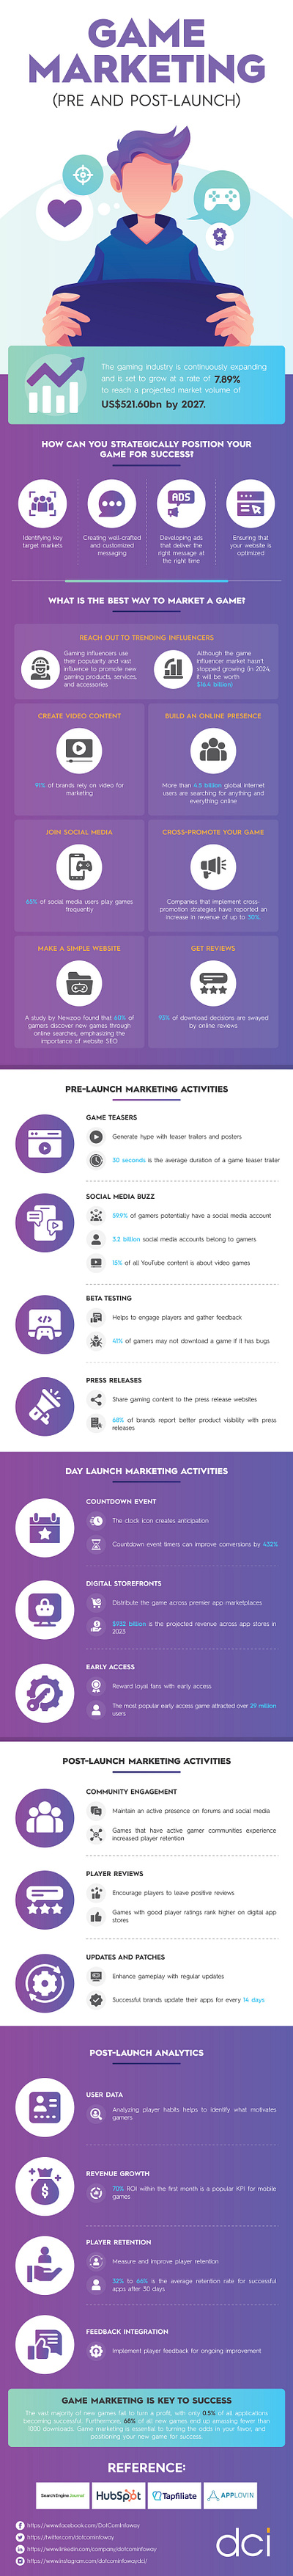 The Game Marketing Guide: Pre and Post-Launch Strategies digitalmarketing launchstrategy marketingstrategy postlaunchstrategy prelaunchstrategy search ranking factors seo ranking factors